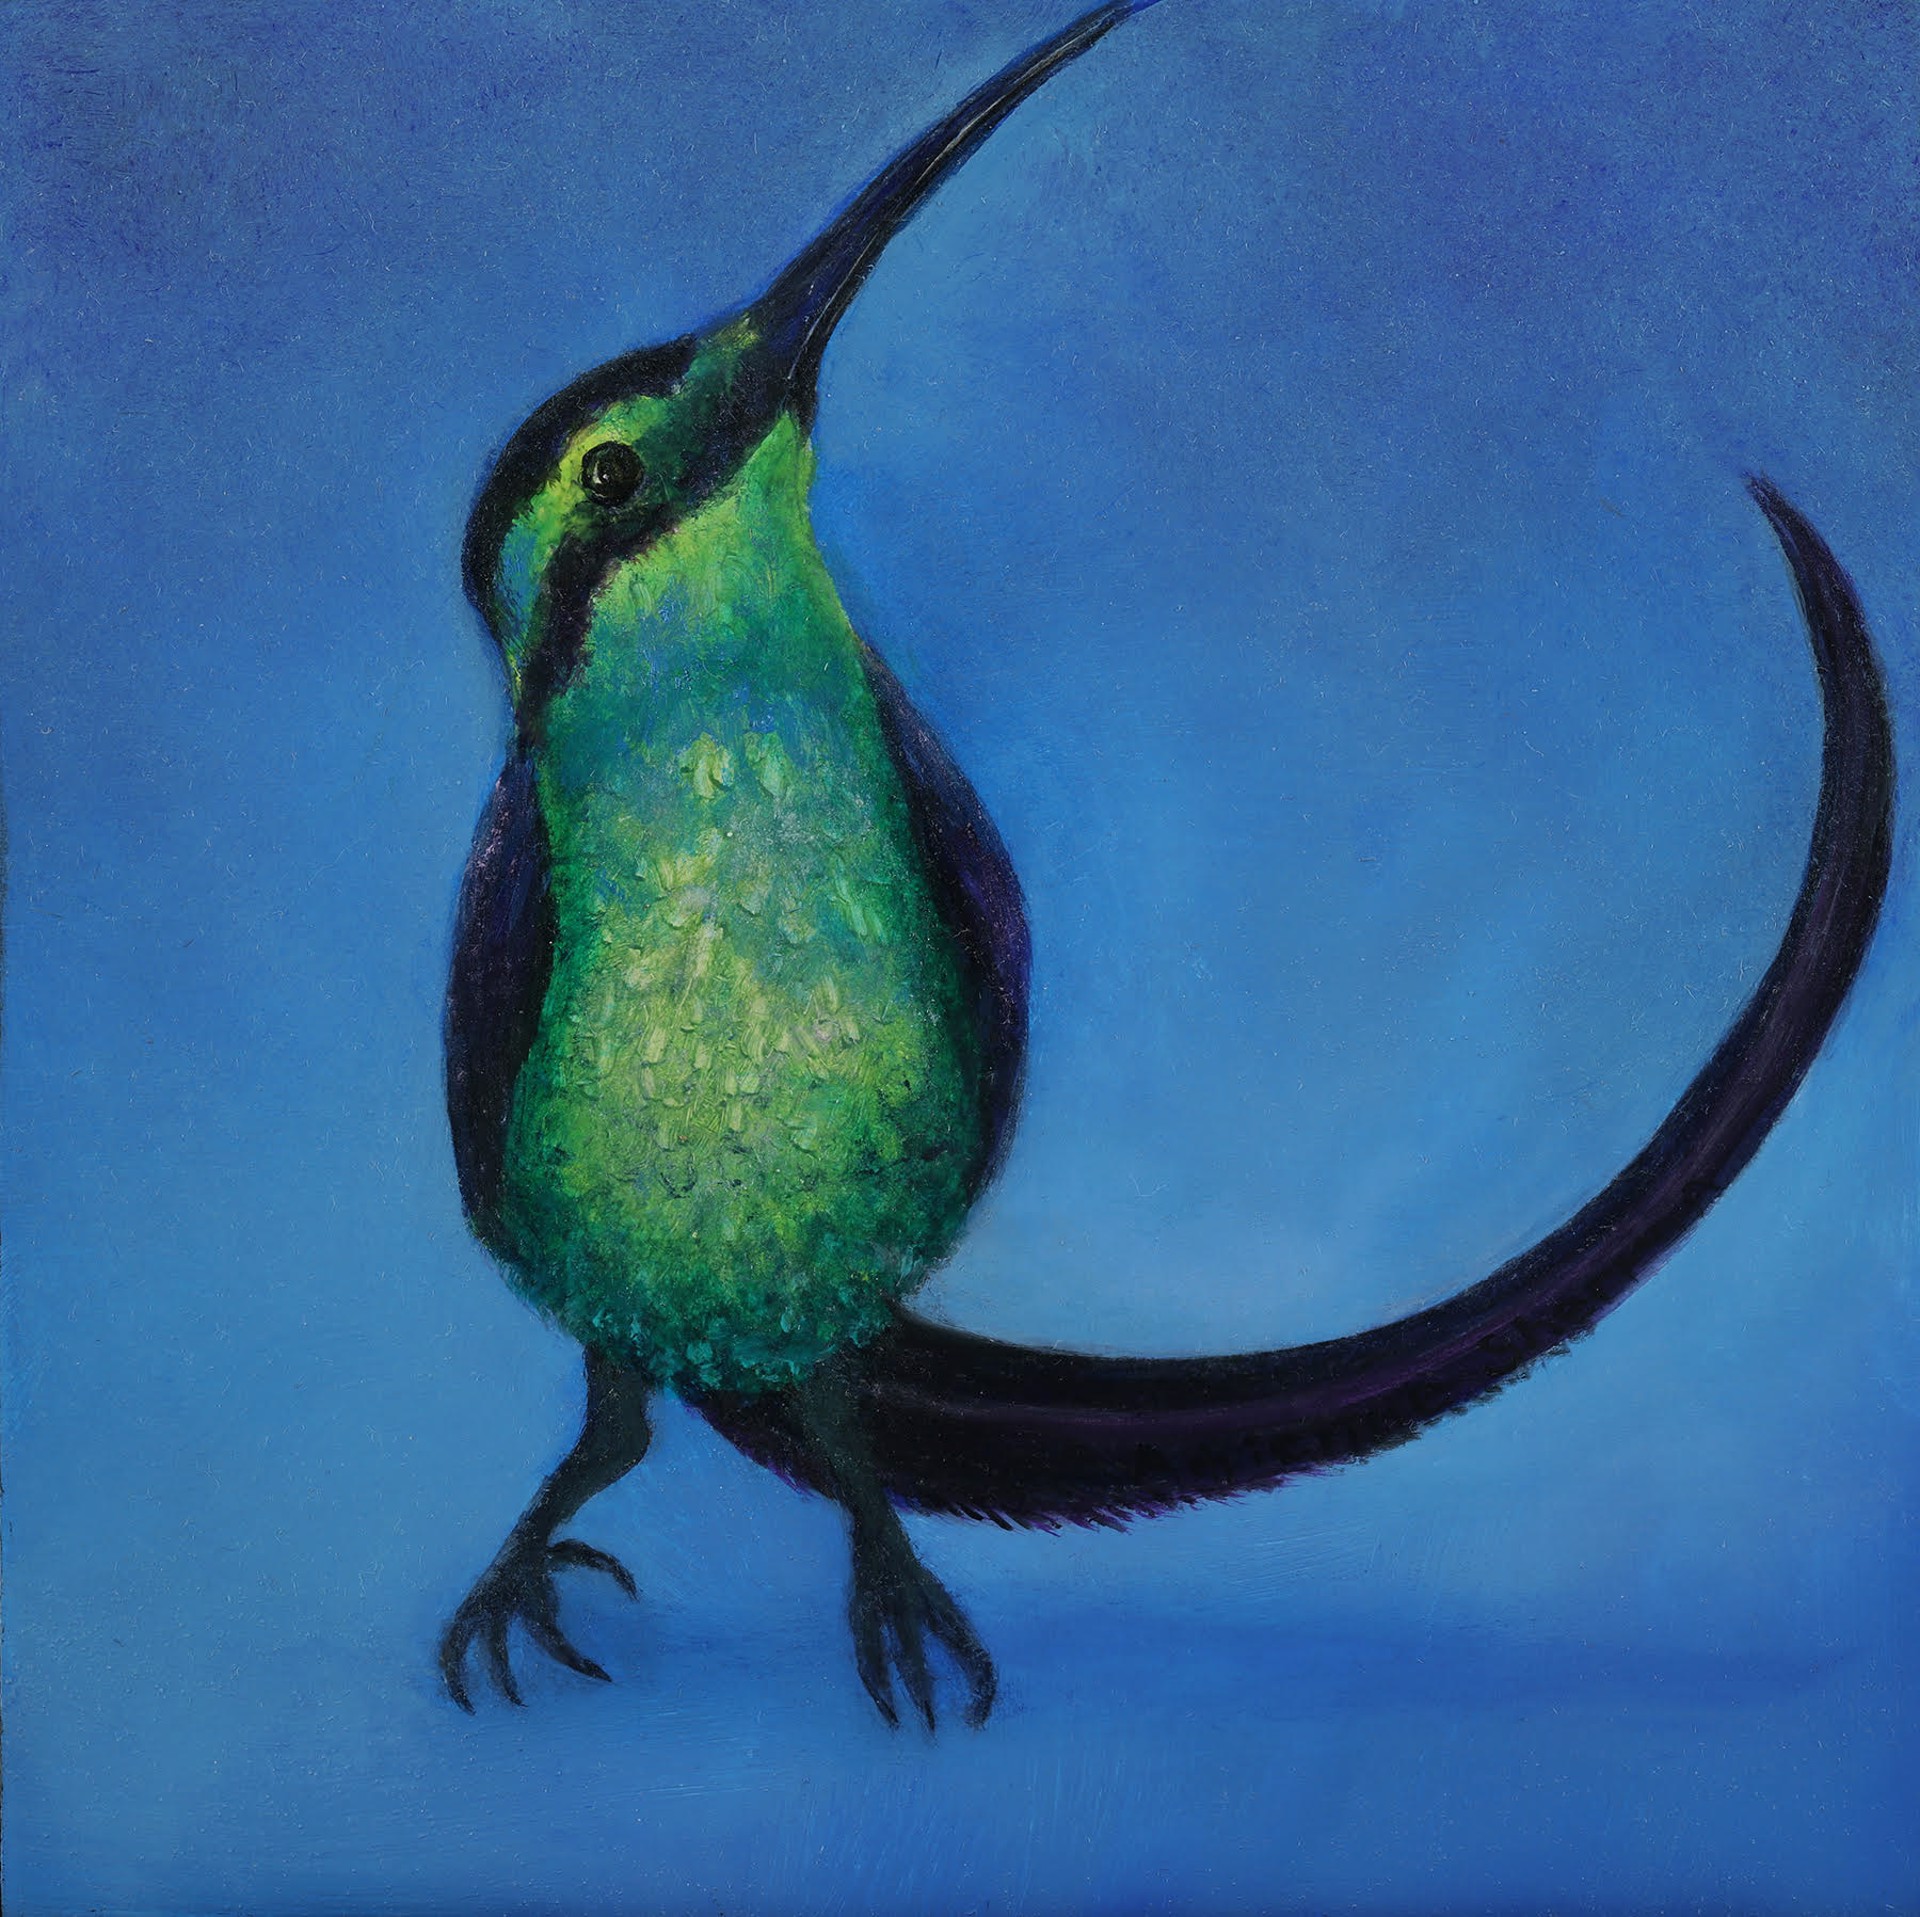 "Longtailed Wood Nymph" Endangered Brazil Thalurania watertonii by Adrienne Sherman